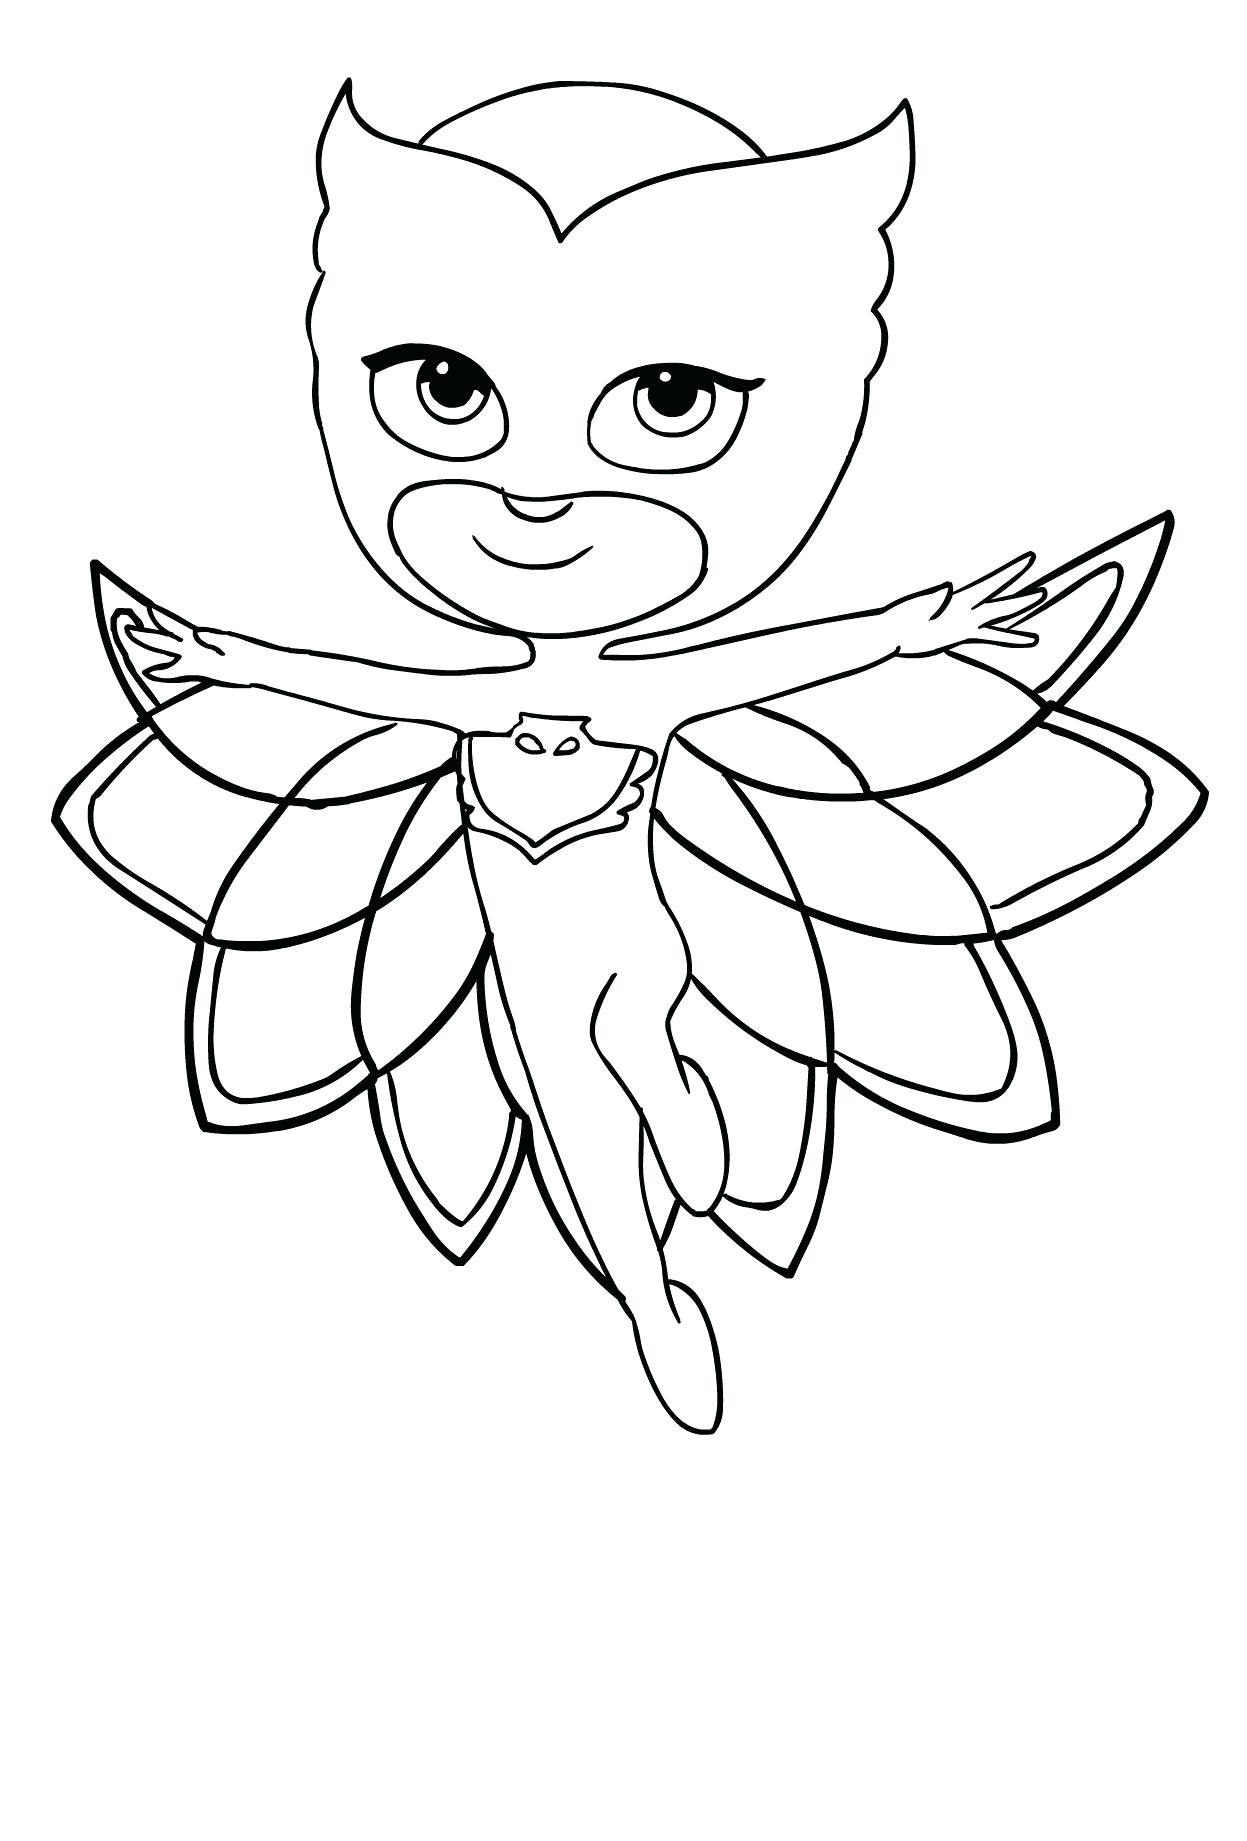 Owlette Coloring Pages Coloring Home